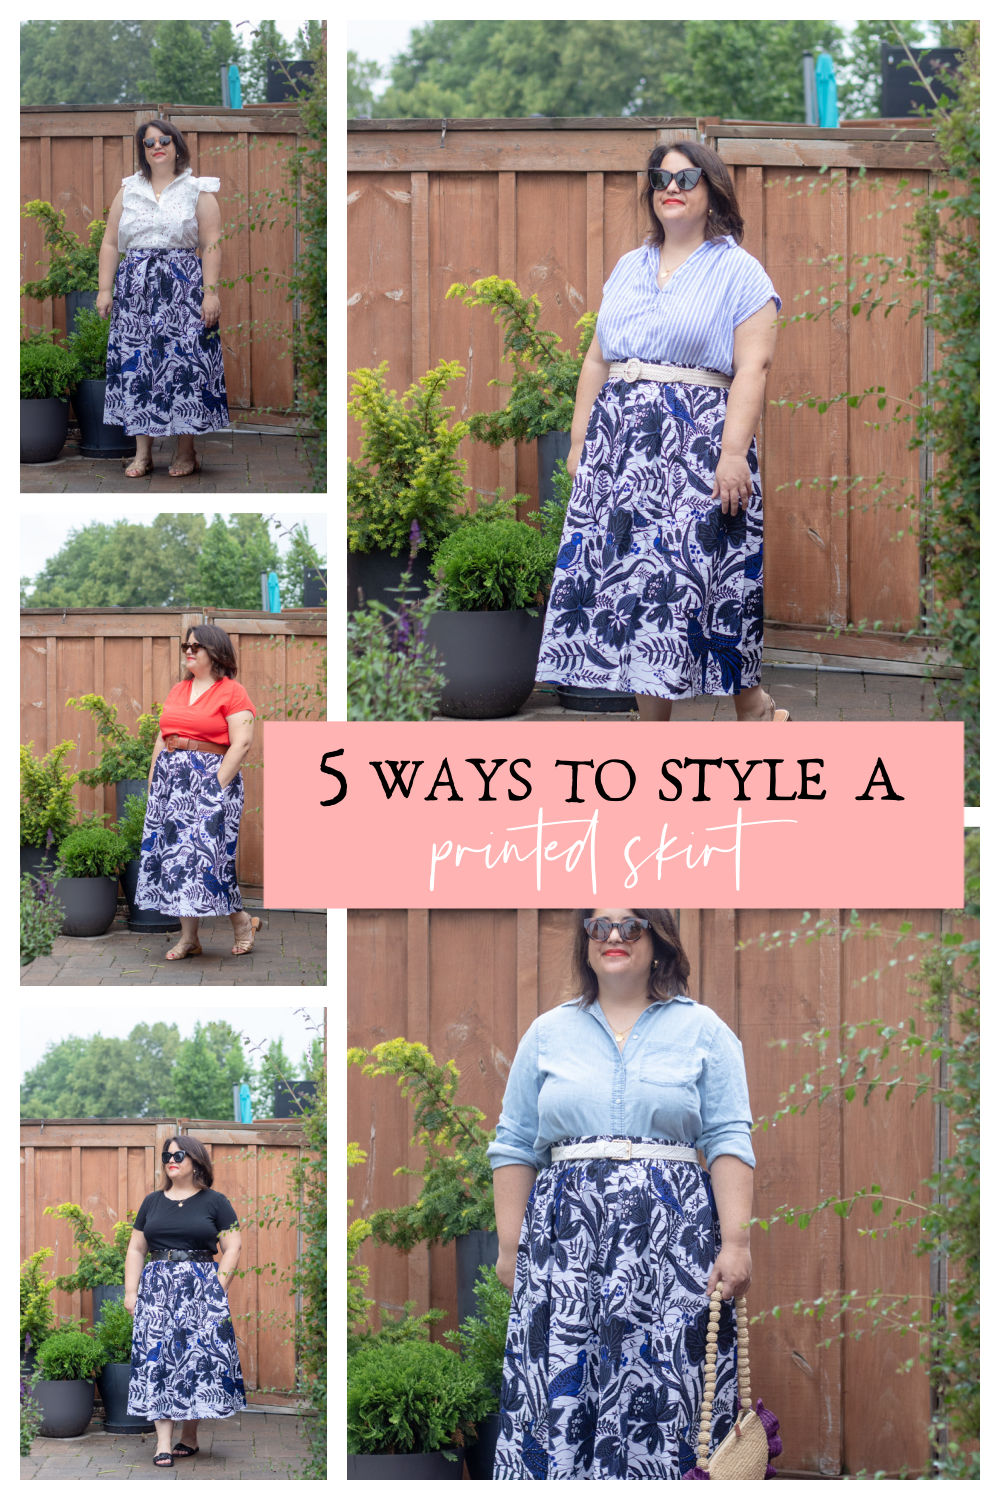 5 ways to style a printed skirt, wax skirt outfit ideas